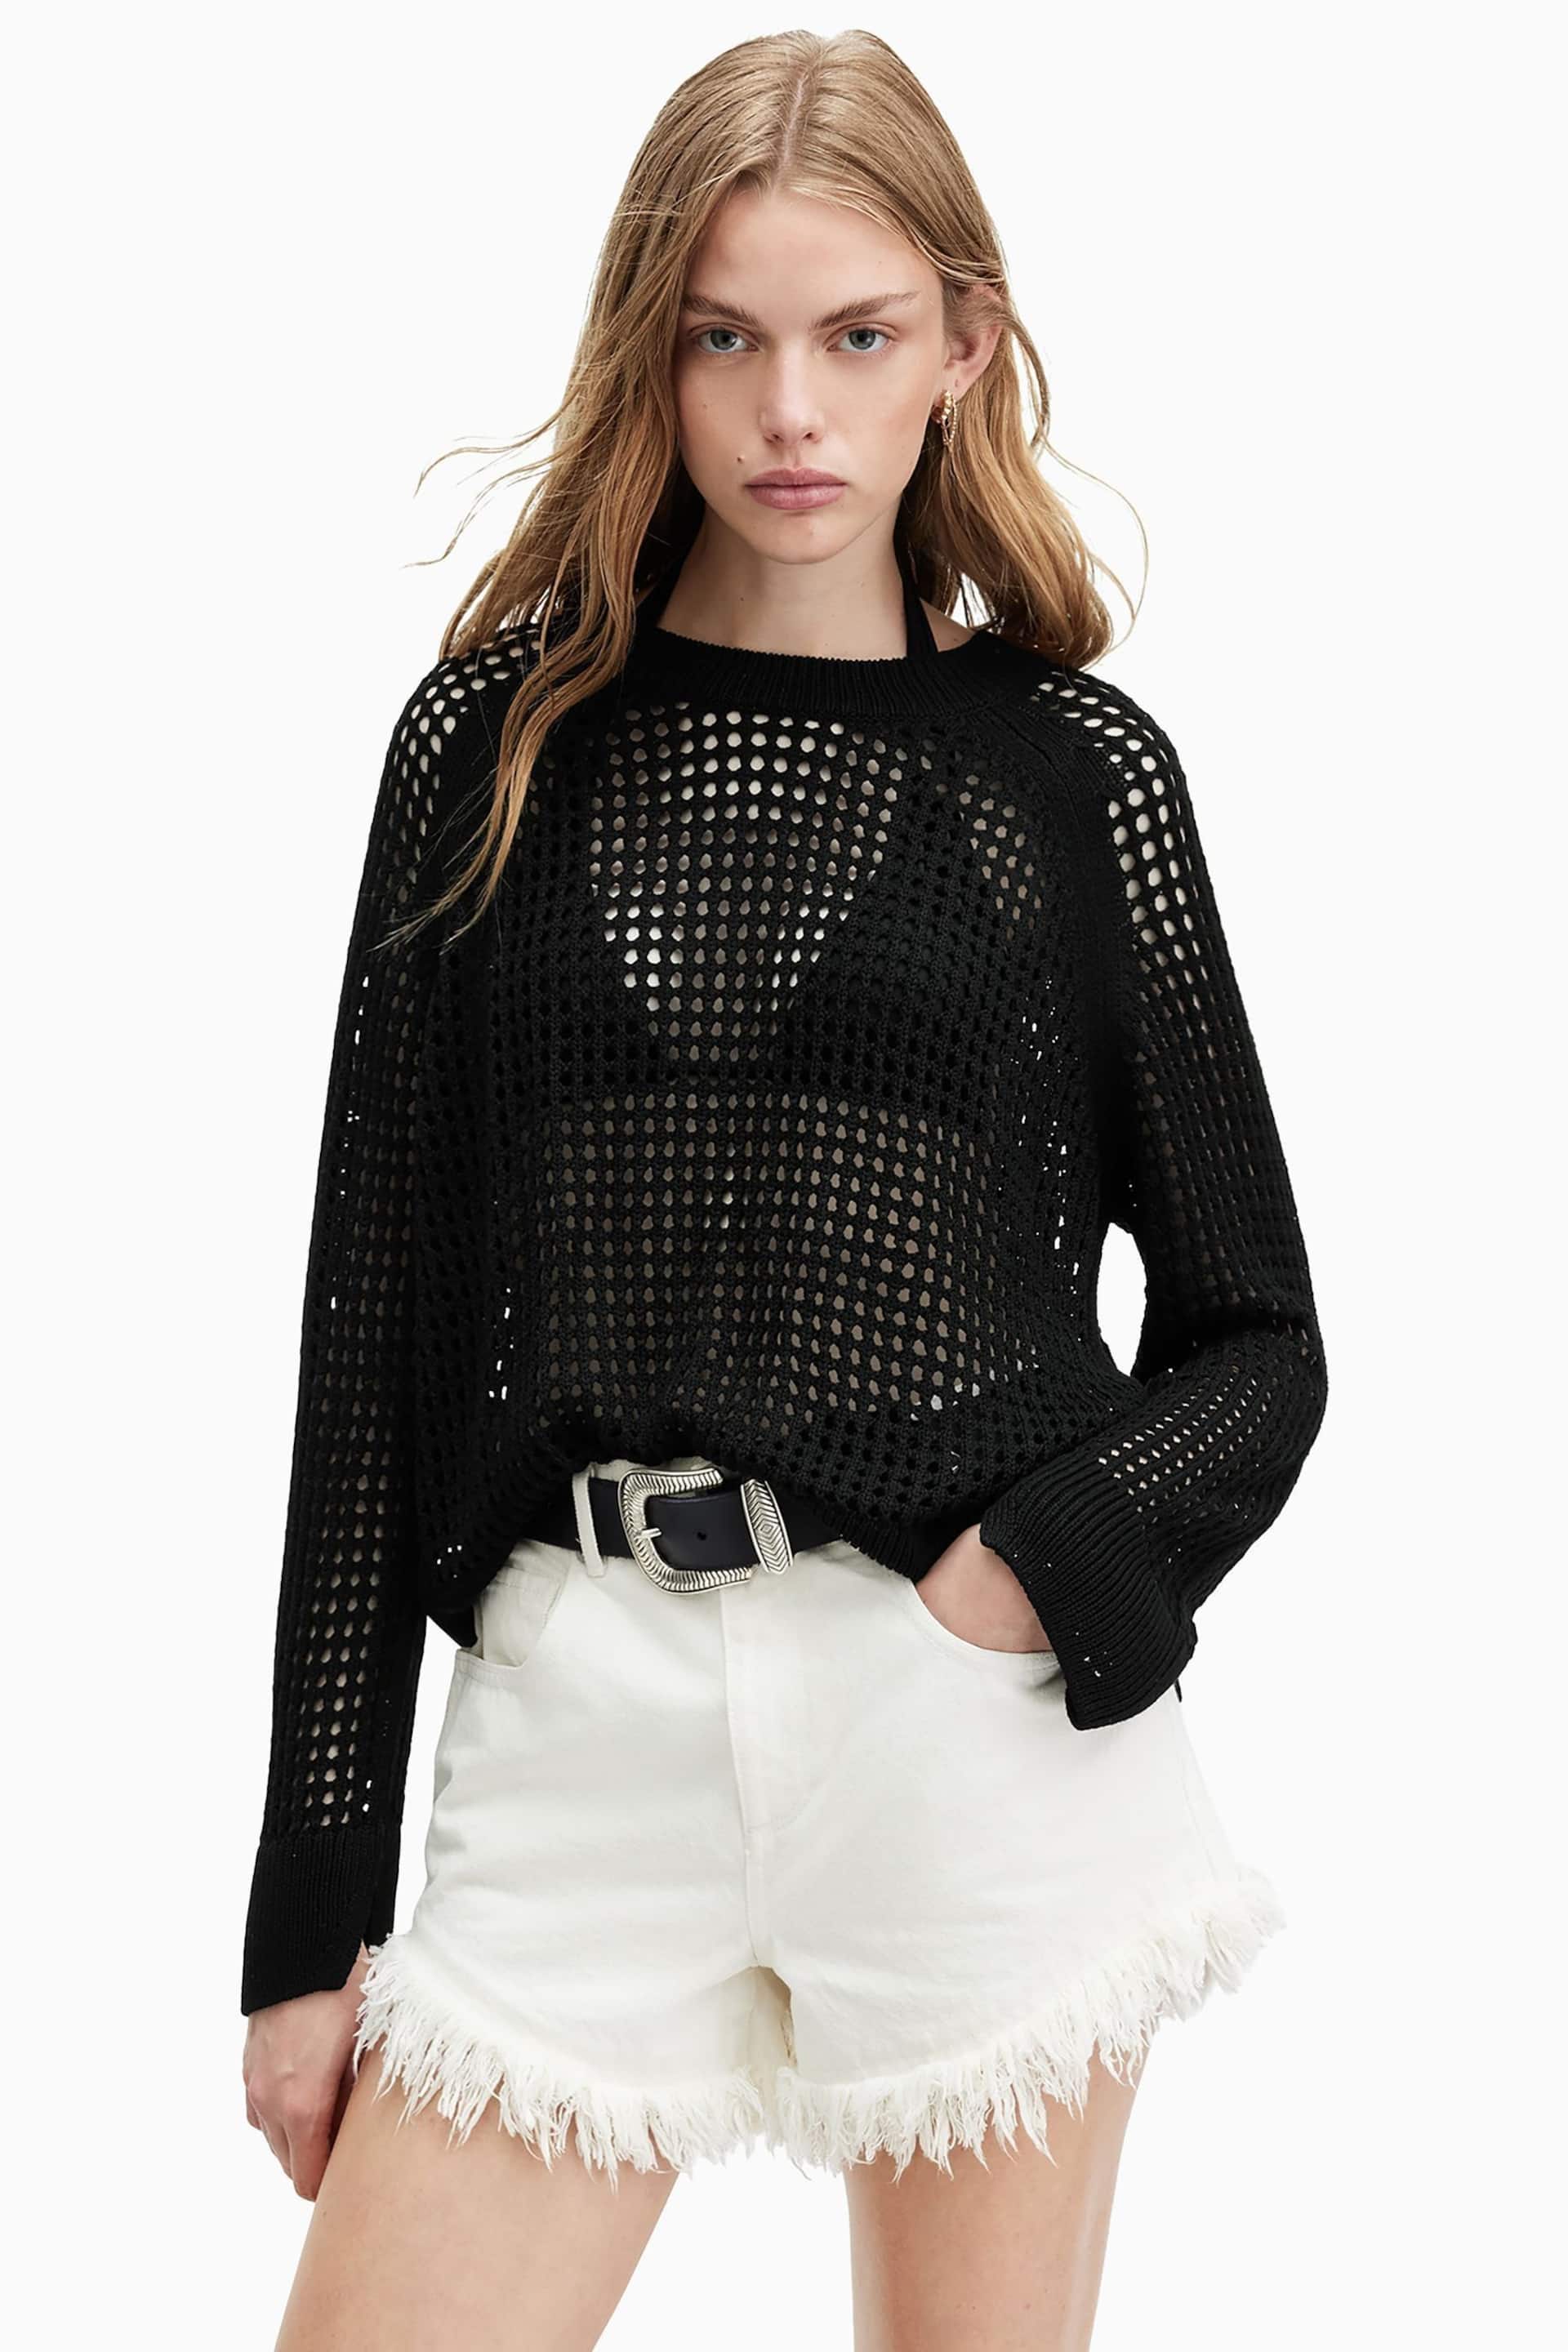 AllSaints Black Paloma Crew Neck Jumpers - Image 1 of 7